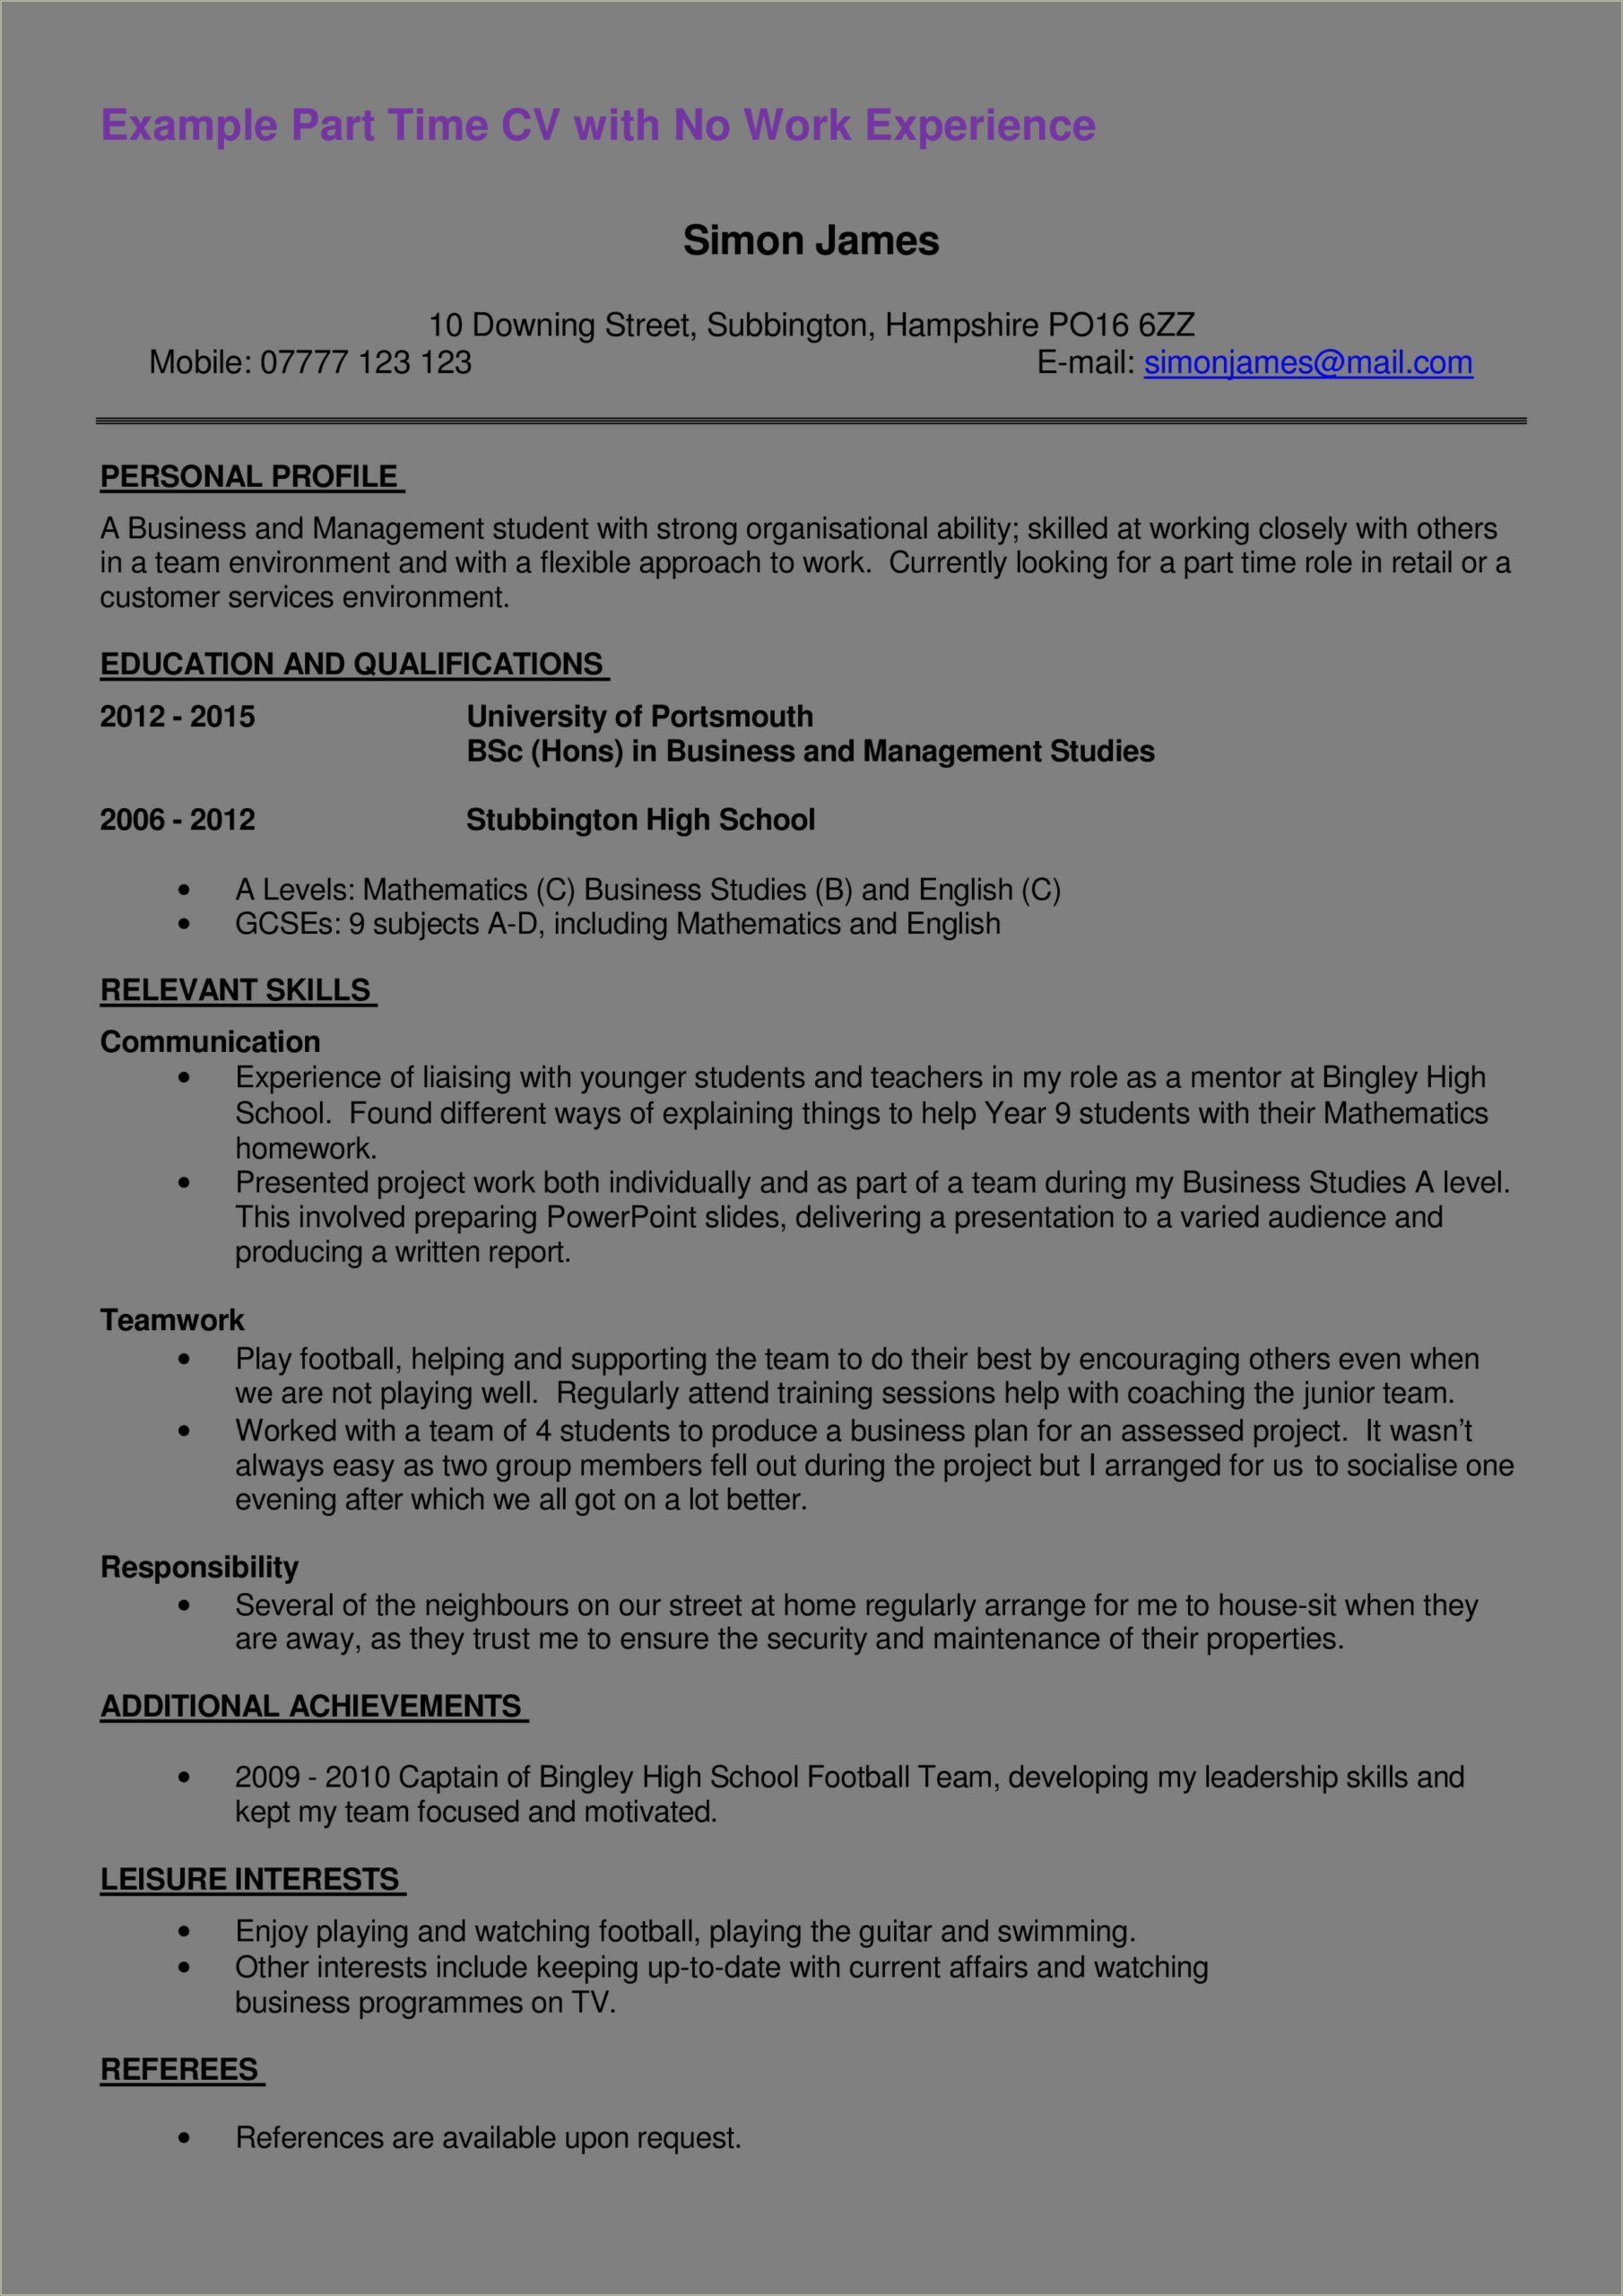 Resume Example With Part Time Work Experience